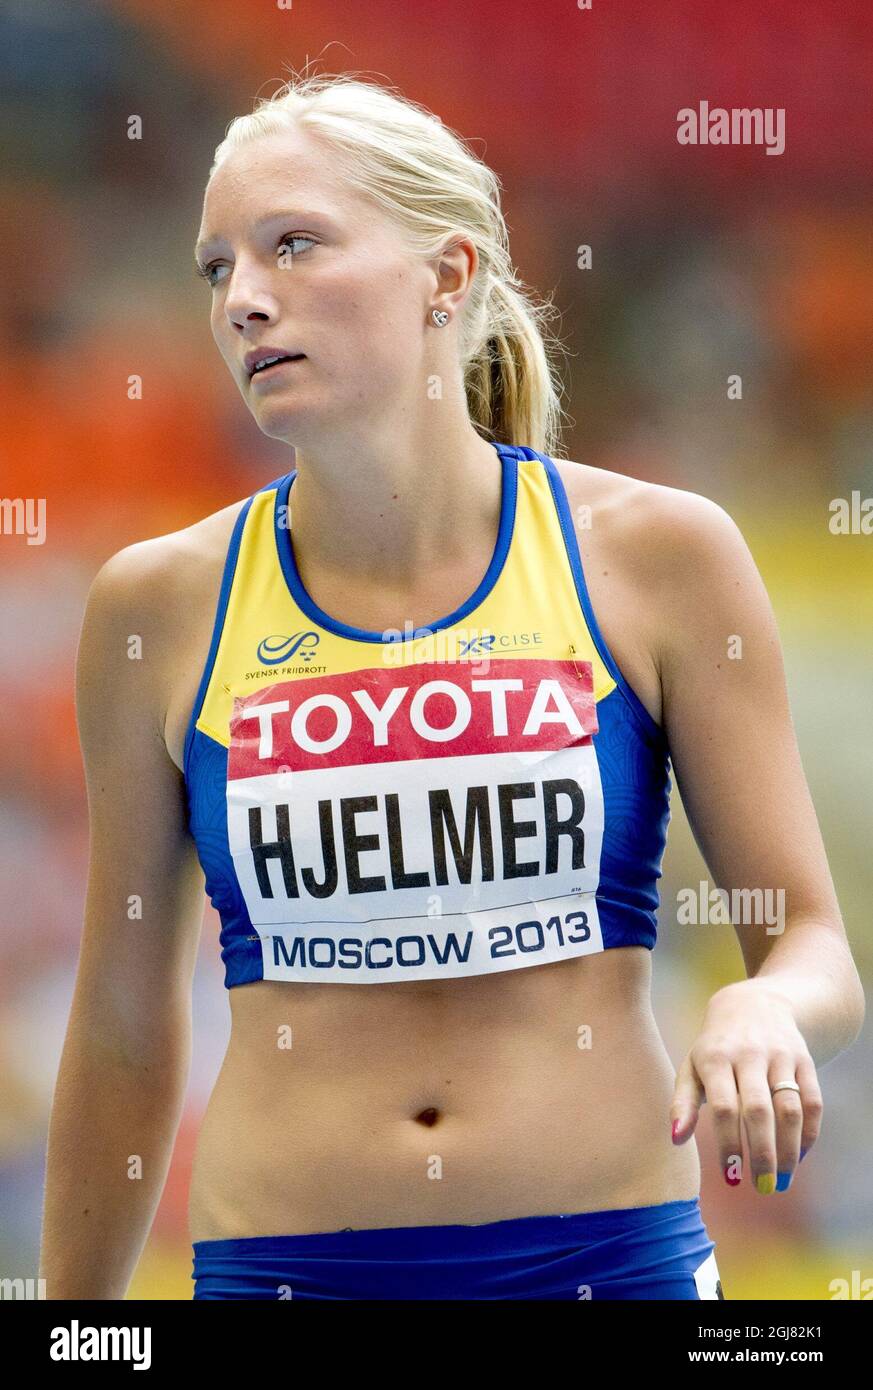 MOSKVA 20130815 Sweden's Moa Hjelmer runs with her fingernails painted in  the colors of the rainbow as she competes in a women's 200-meter heat at  the World Athletics Championships in the Luzhniki